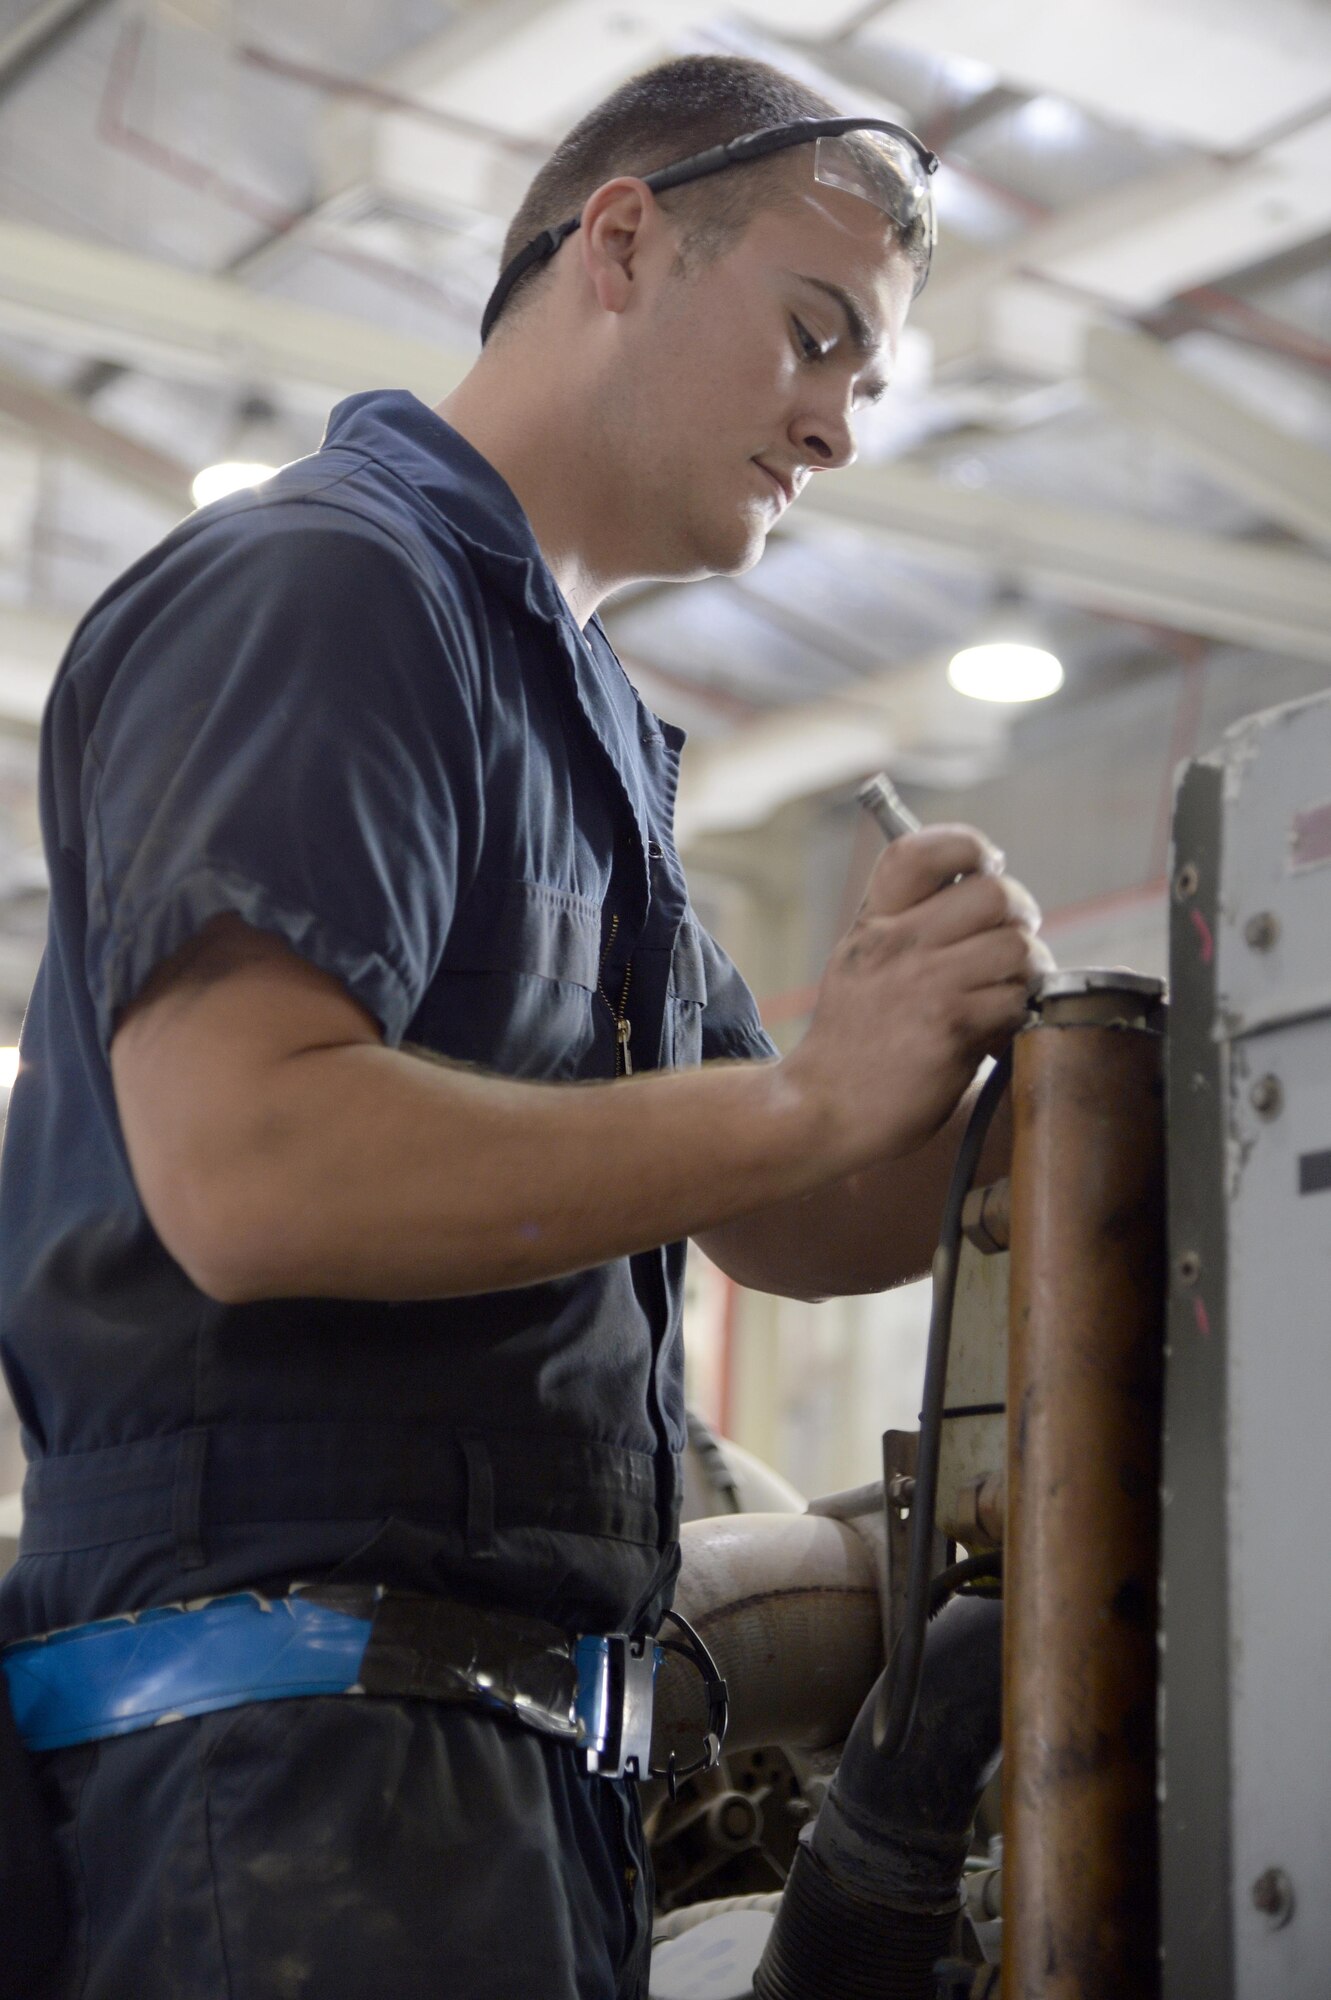 Senior Airman Michael, AGE journeyman, prepares an A/M32A-103 Generator for a periodic inspection at an undisclosed location in Southwest Asia Mar. 3, 2015. AGE Airmen maintain electrical systems, hydraulic systems, pneumatic systems, you name it but really aren’t masters of any one system. Michael is currently deployed from Hill Air Force Base, Utah and is a native of Burleson, Texas. (U.S. Air Force photo/Tech. Sgt. Marie Brown) (RELEASED)